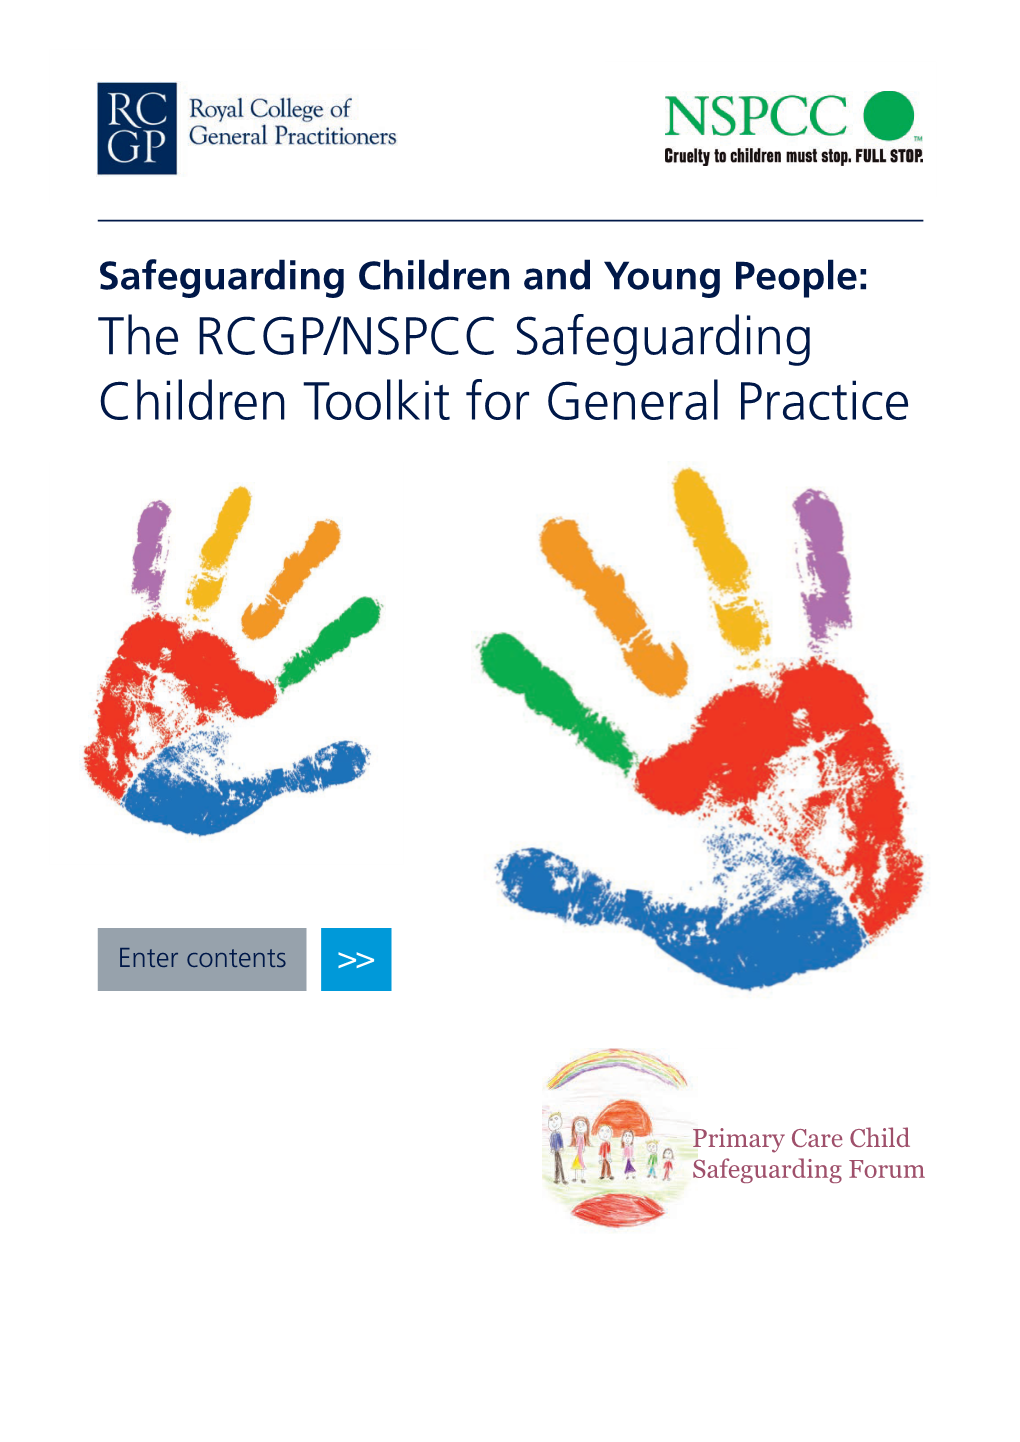 The RCGP/NSPCC Safeguarding Children Toolkit for General Practice